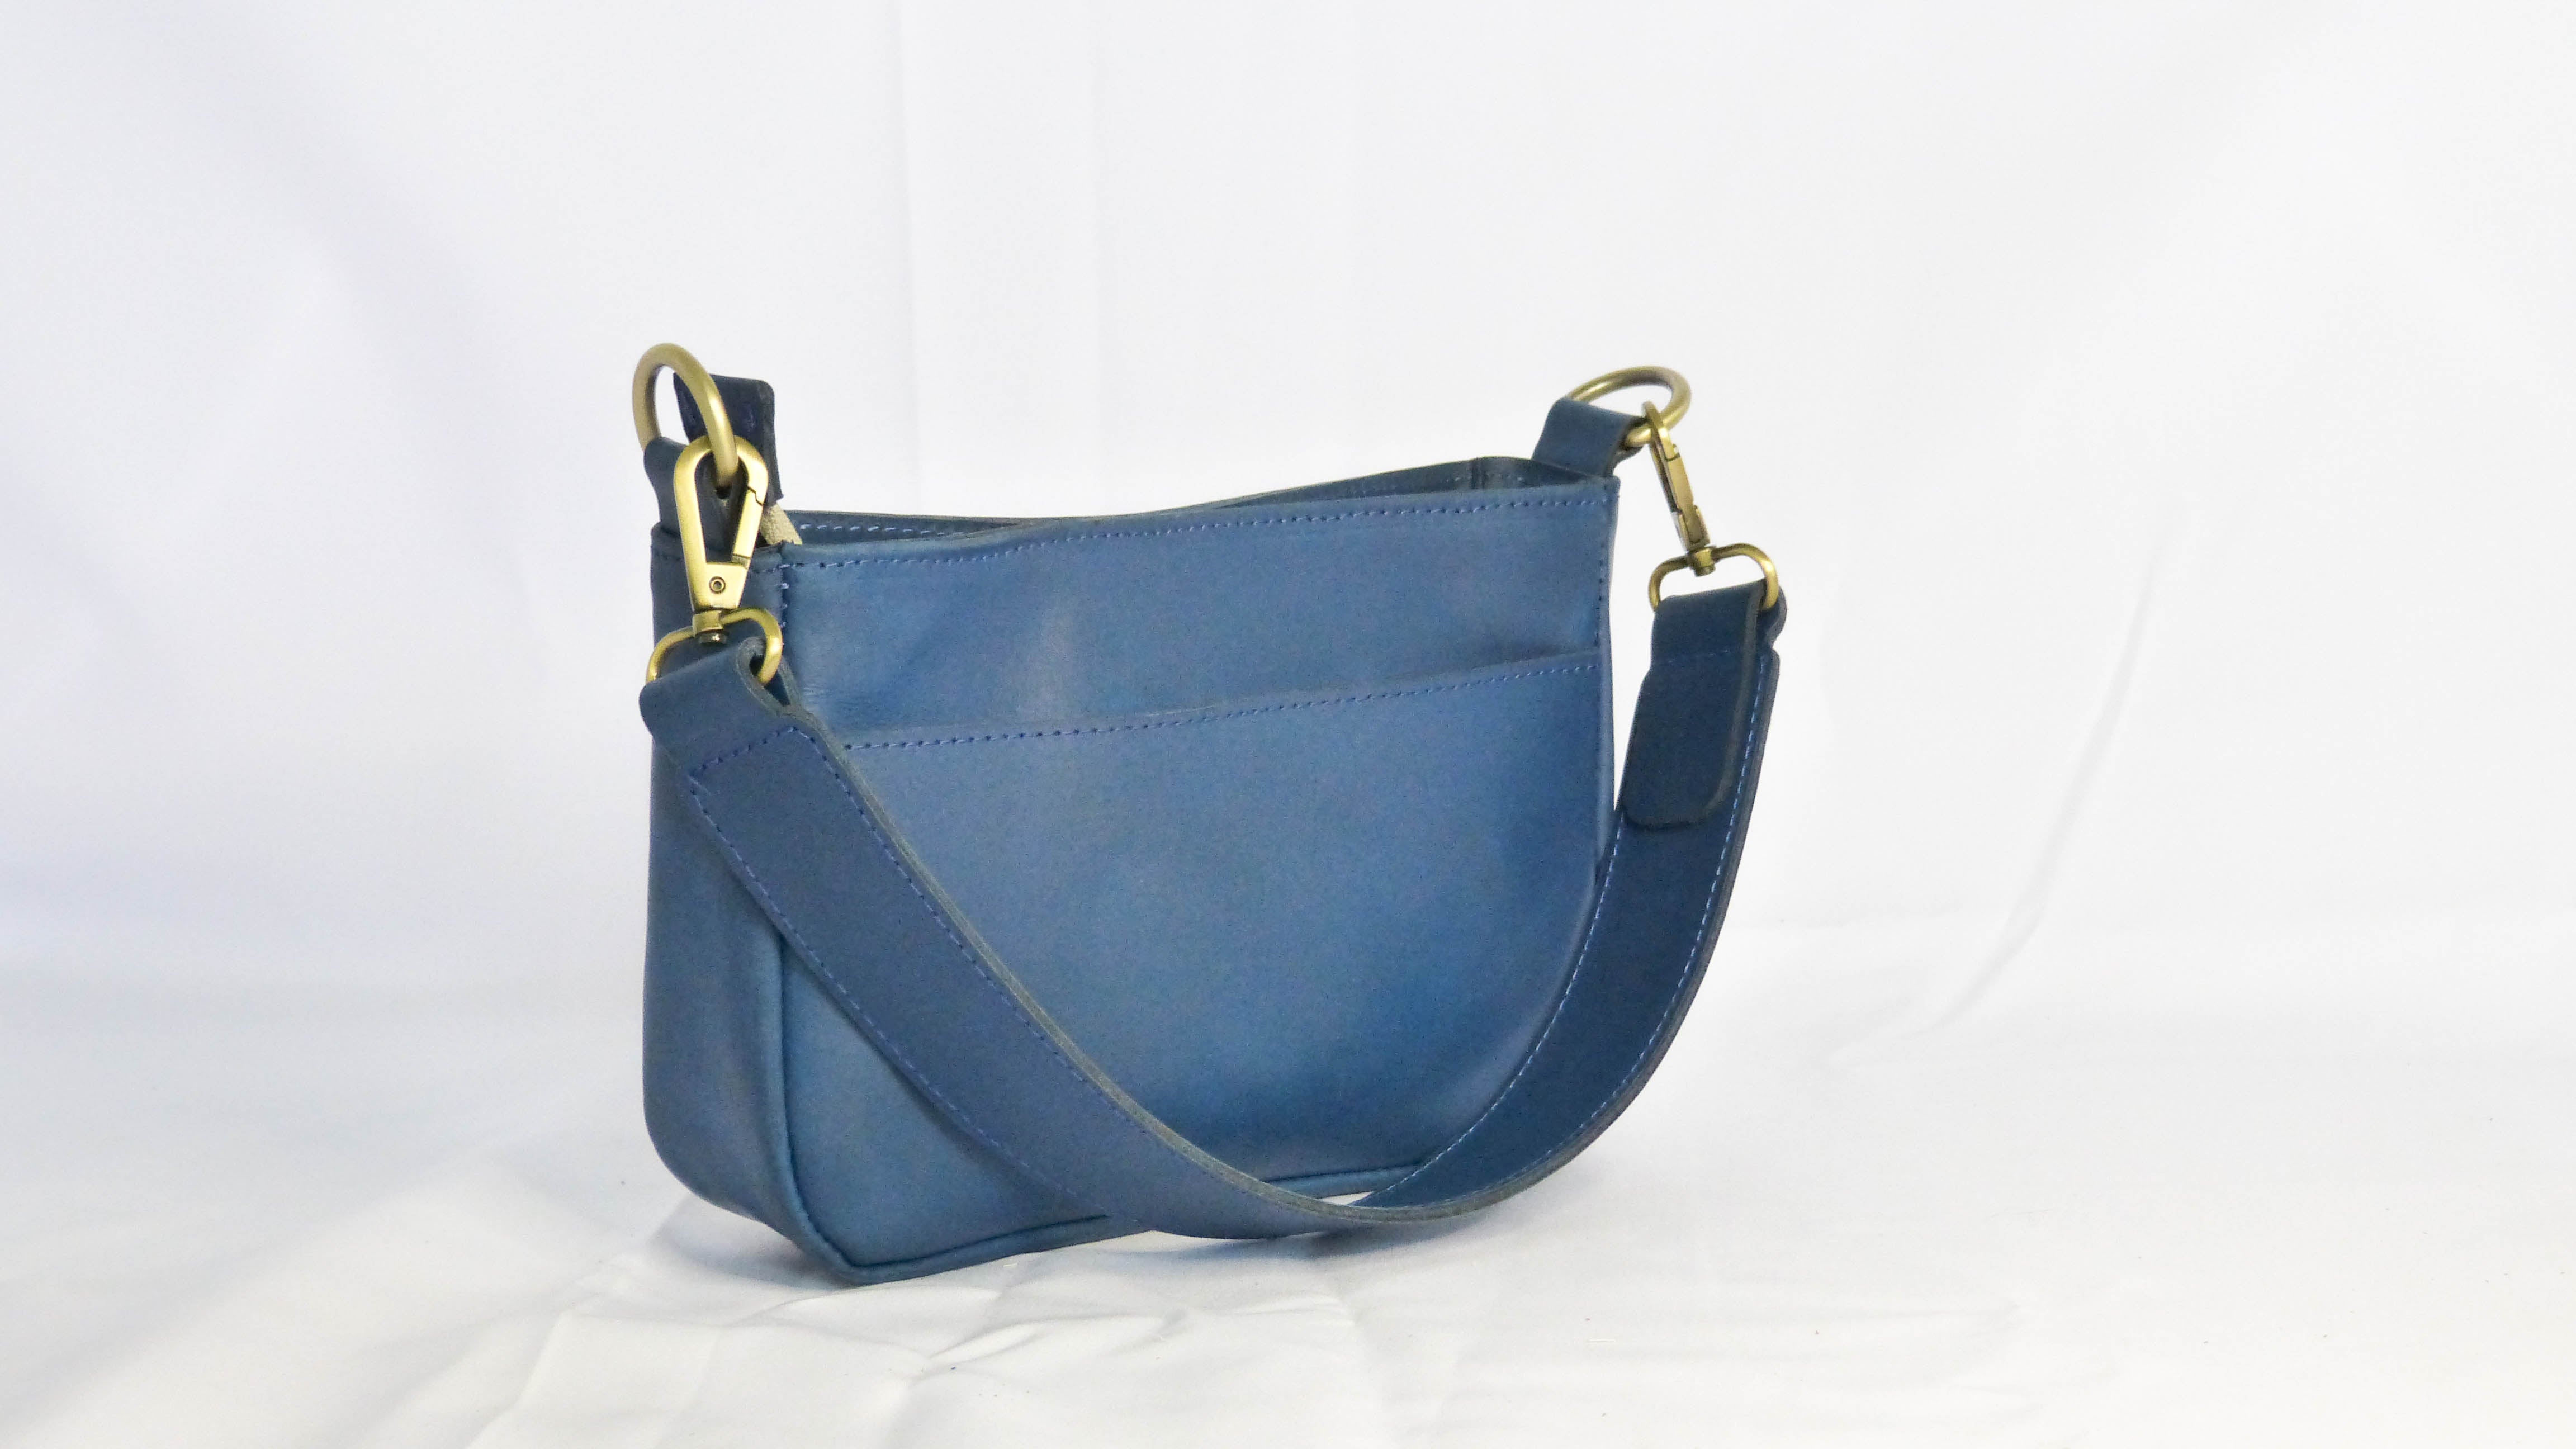 A blue leather Jessica purse with gold handles, removable shoulder strap, zippered top, inside pocket, and outside phone pocket. Handmade by Ethiopian artisans for Madeline Parks Designs.